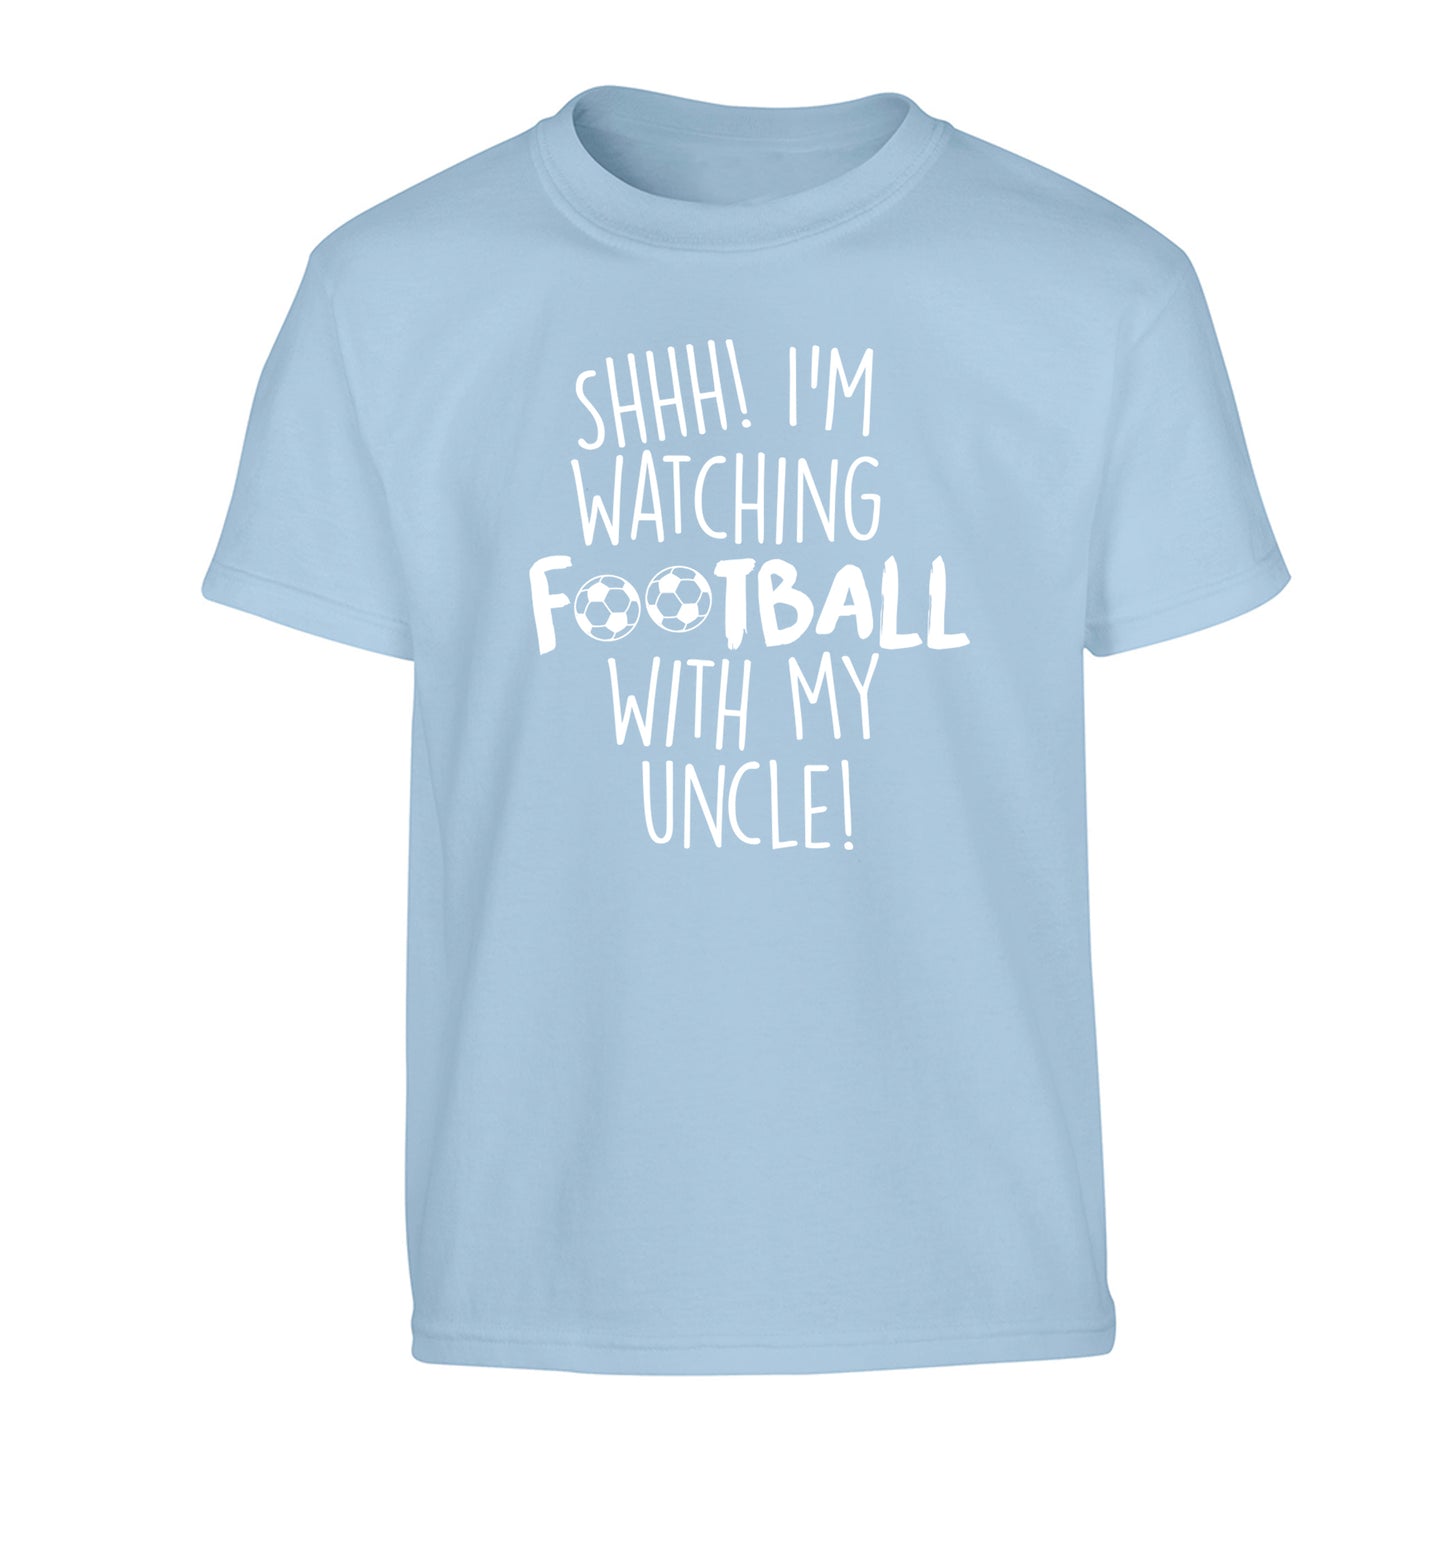 Shhh I'm watching football with my uncle Children's light blue Tshirt 12-14 Years